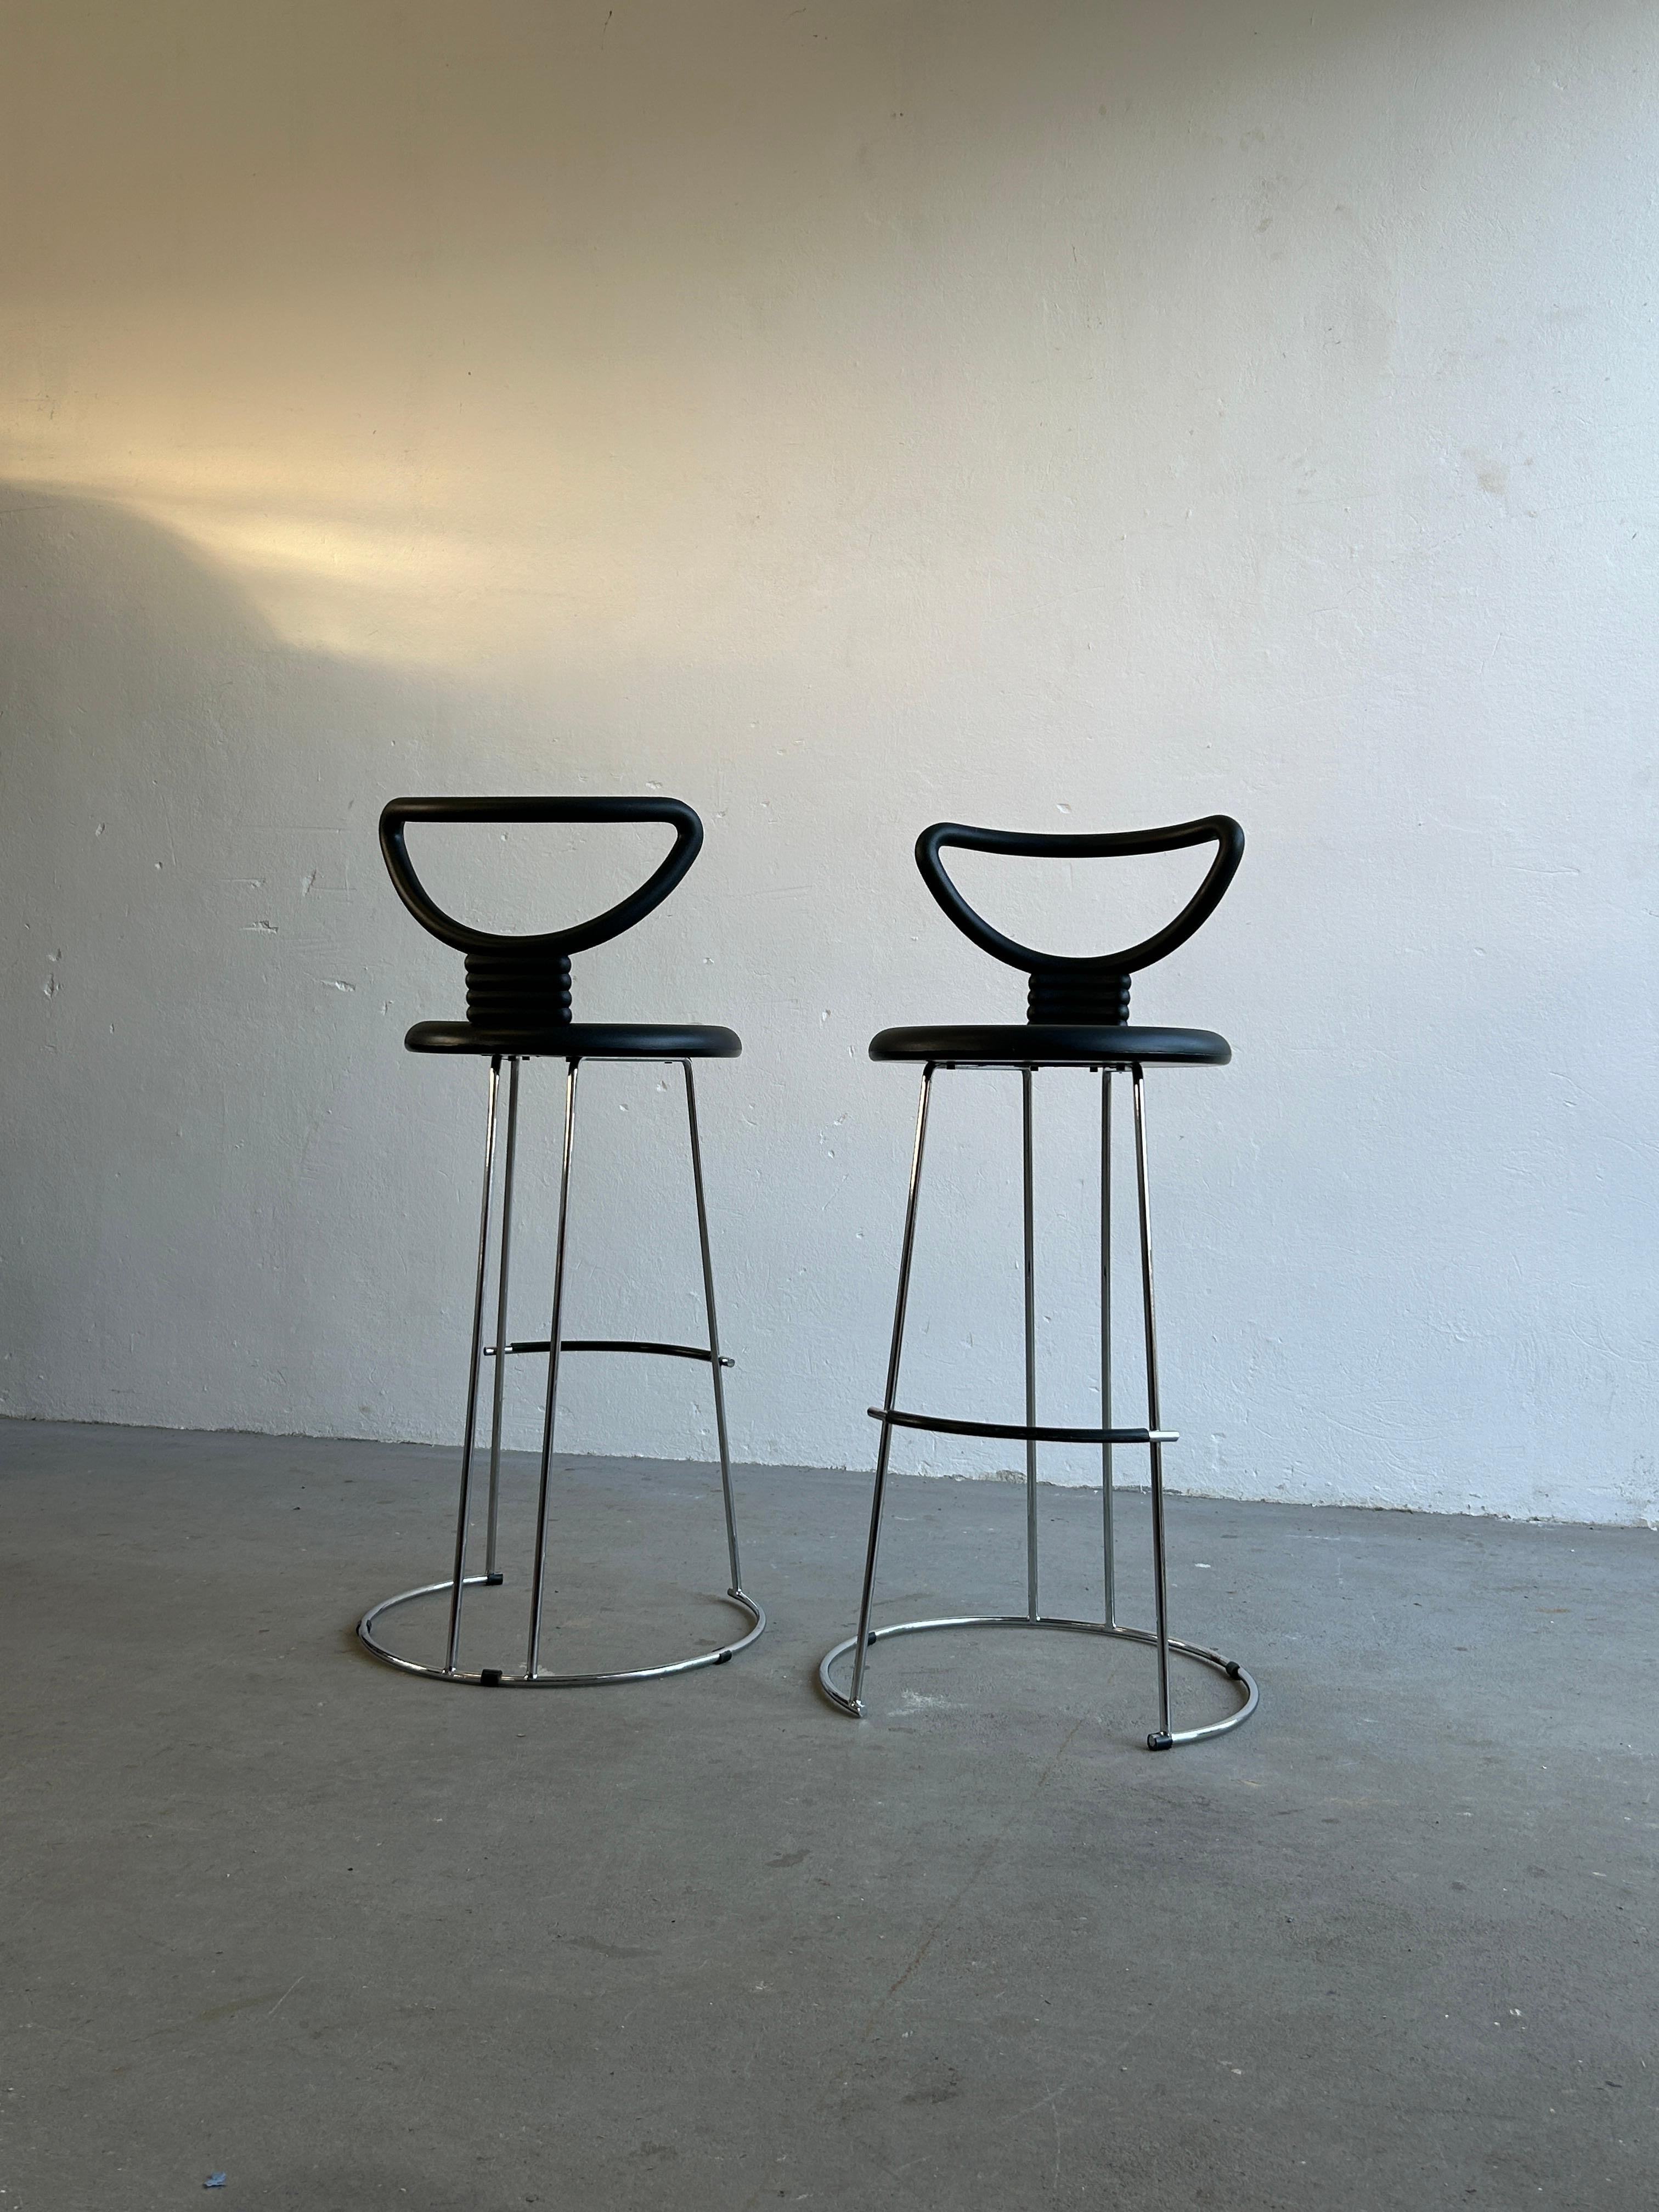 A pair of 'Nardis' bar height stools with rubber like seats on a polished chrome frame designed by Nobu Tanigawa for Fasem Italy.
Unique postmodern design combined with great comfort.

The chairs have a sturdy steel frame with a durable rubber